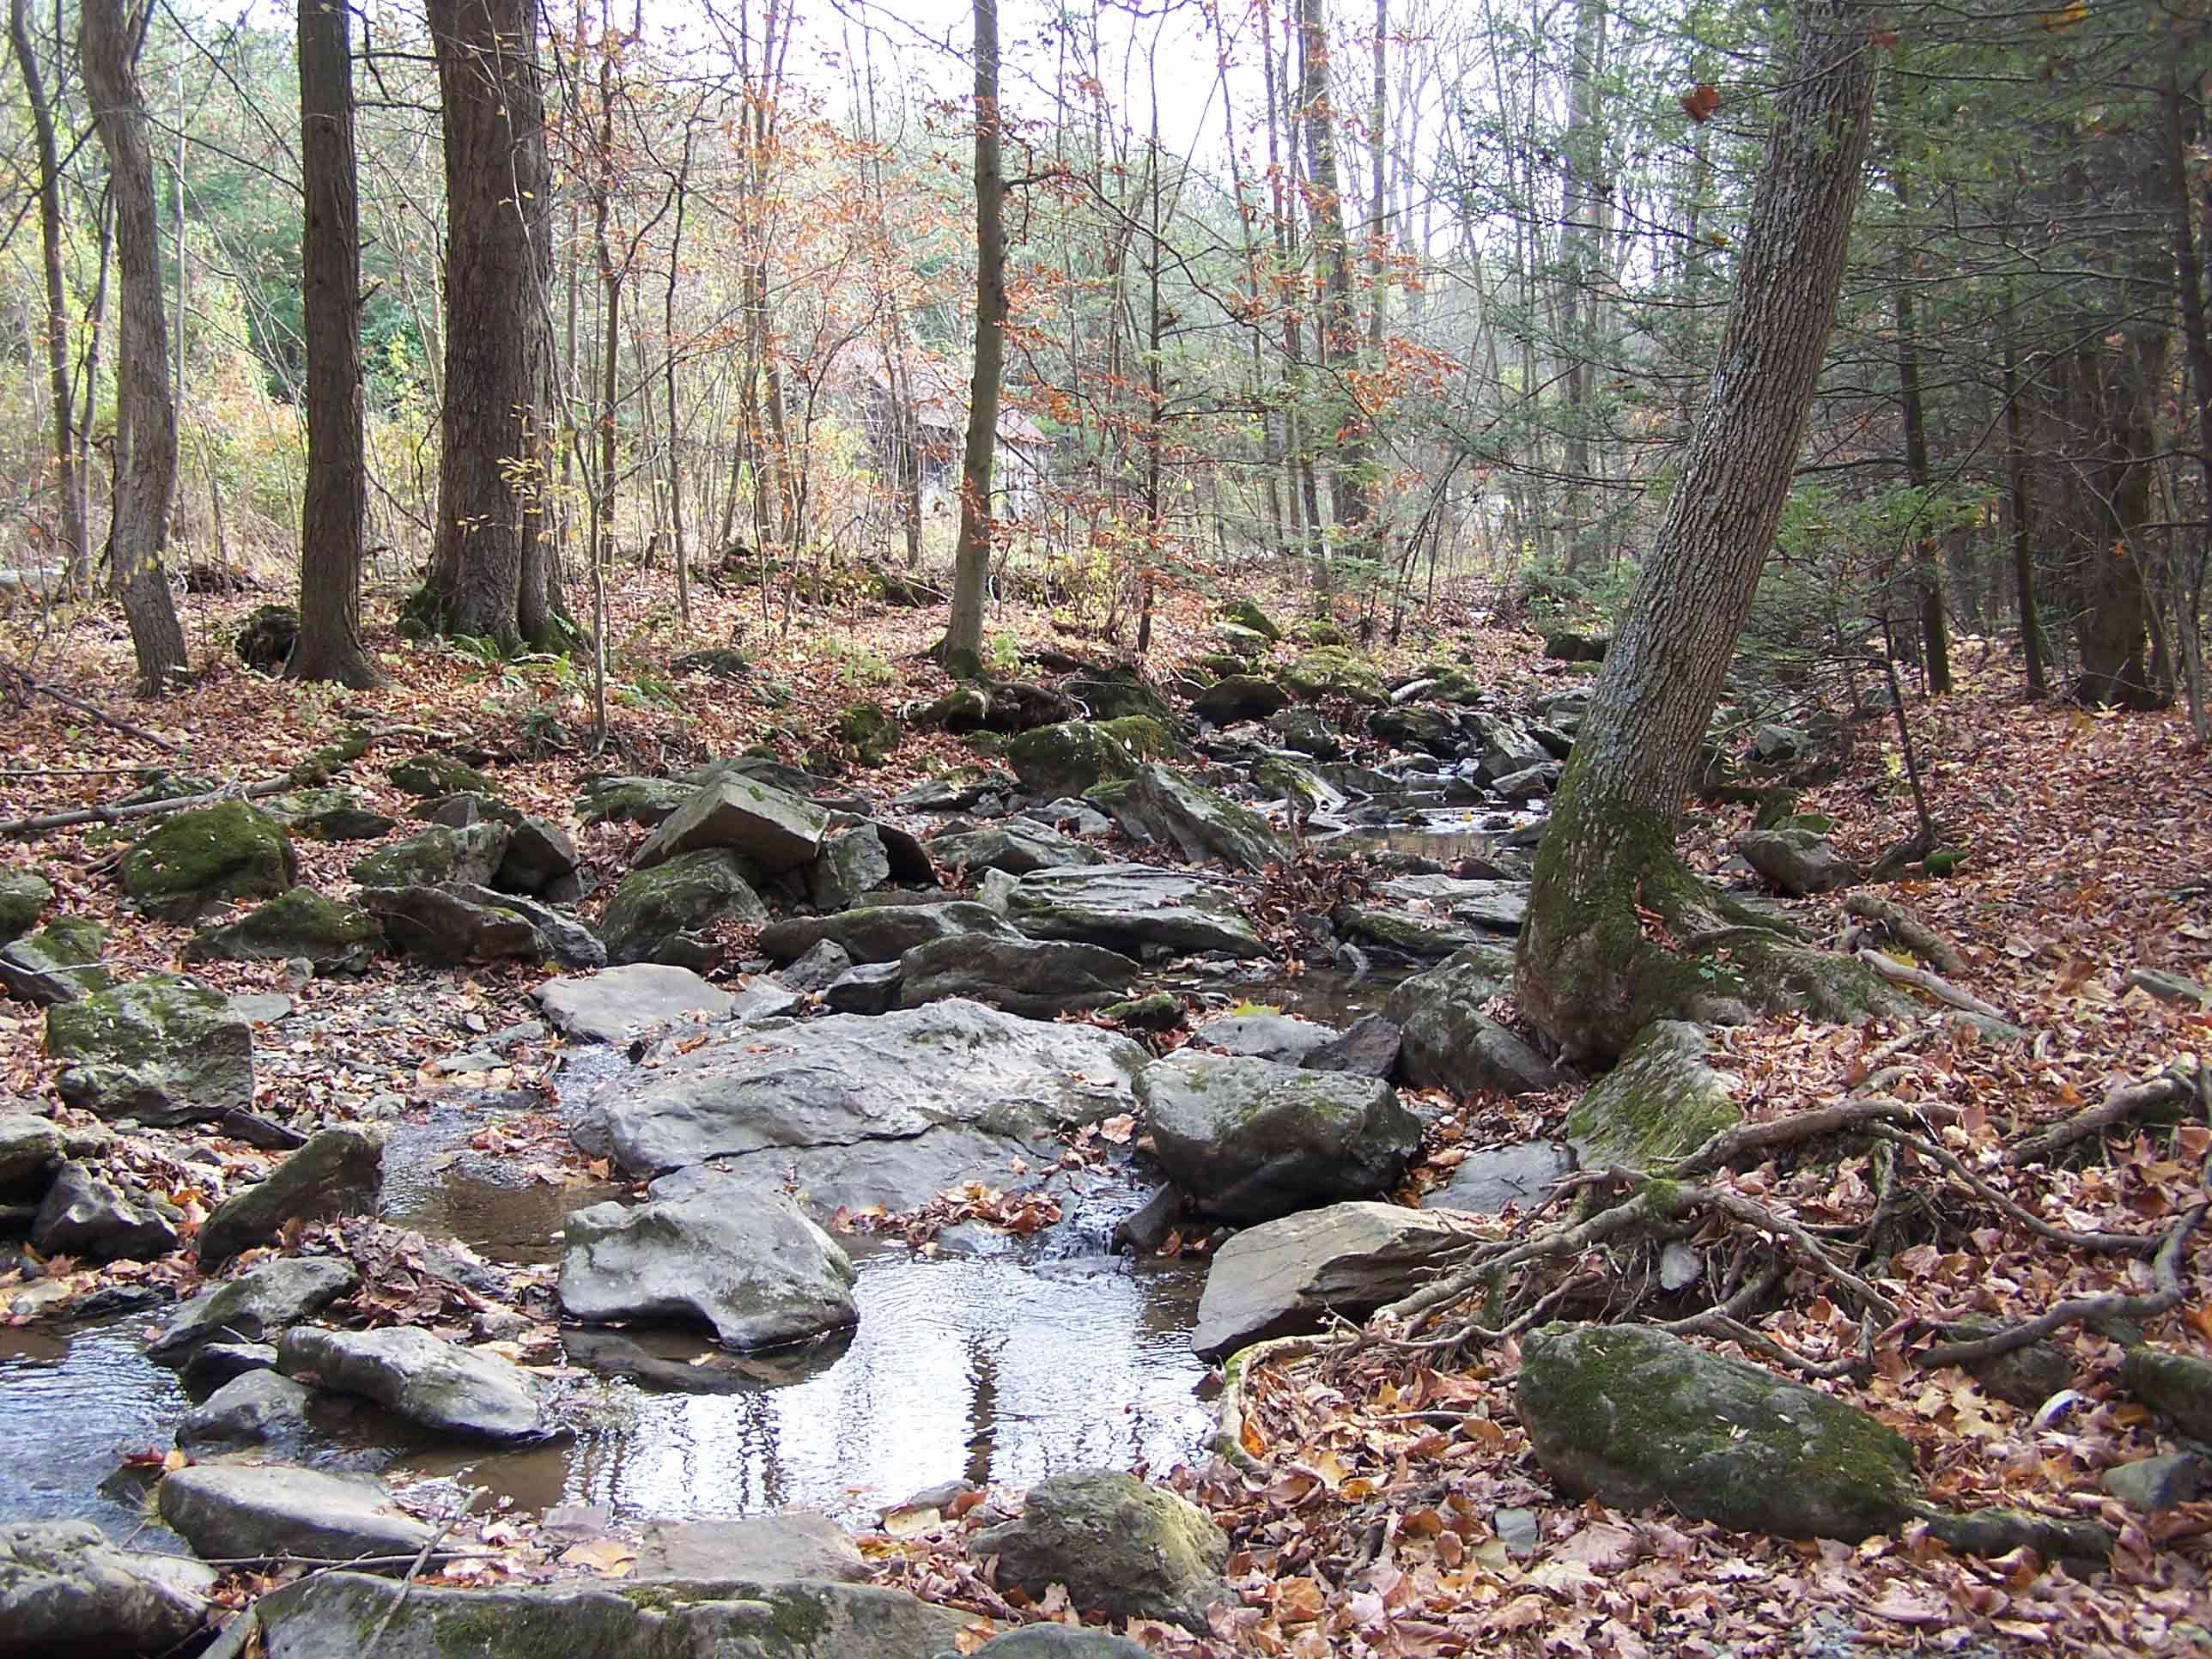 mm 0.9 - Tributary of Little Antietam Creek. Courtesy at@rohland.org